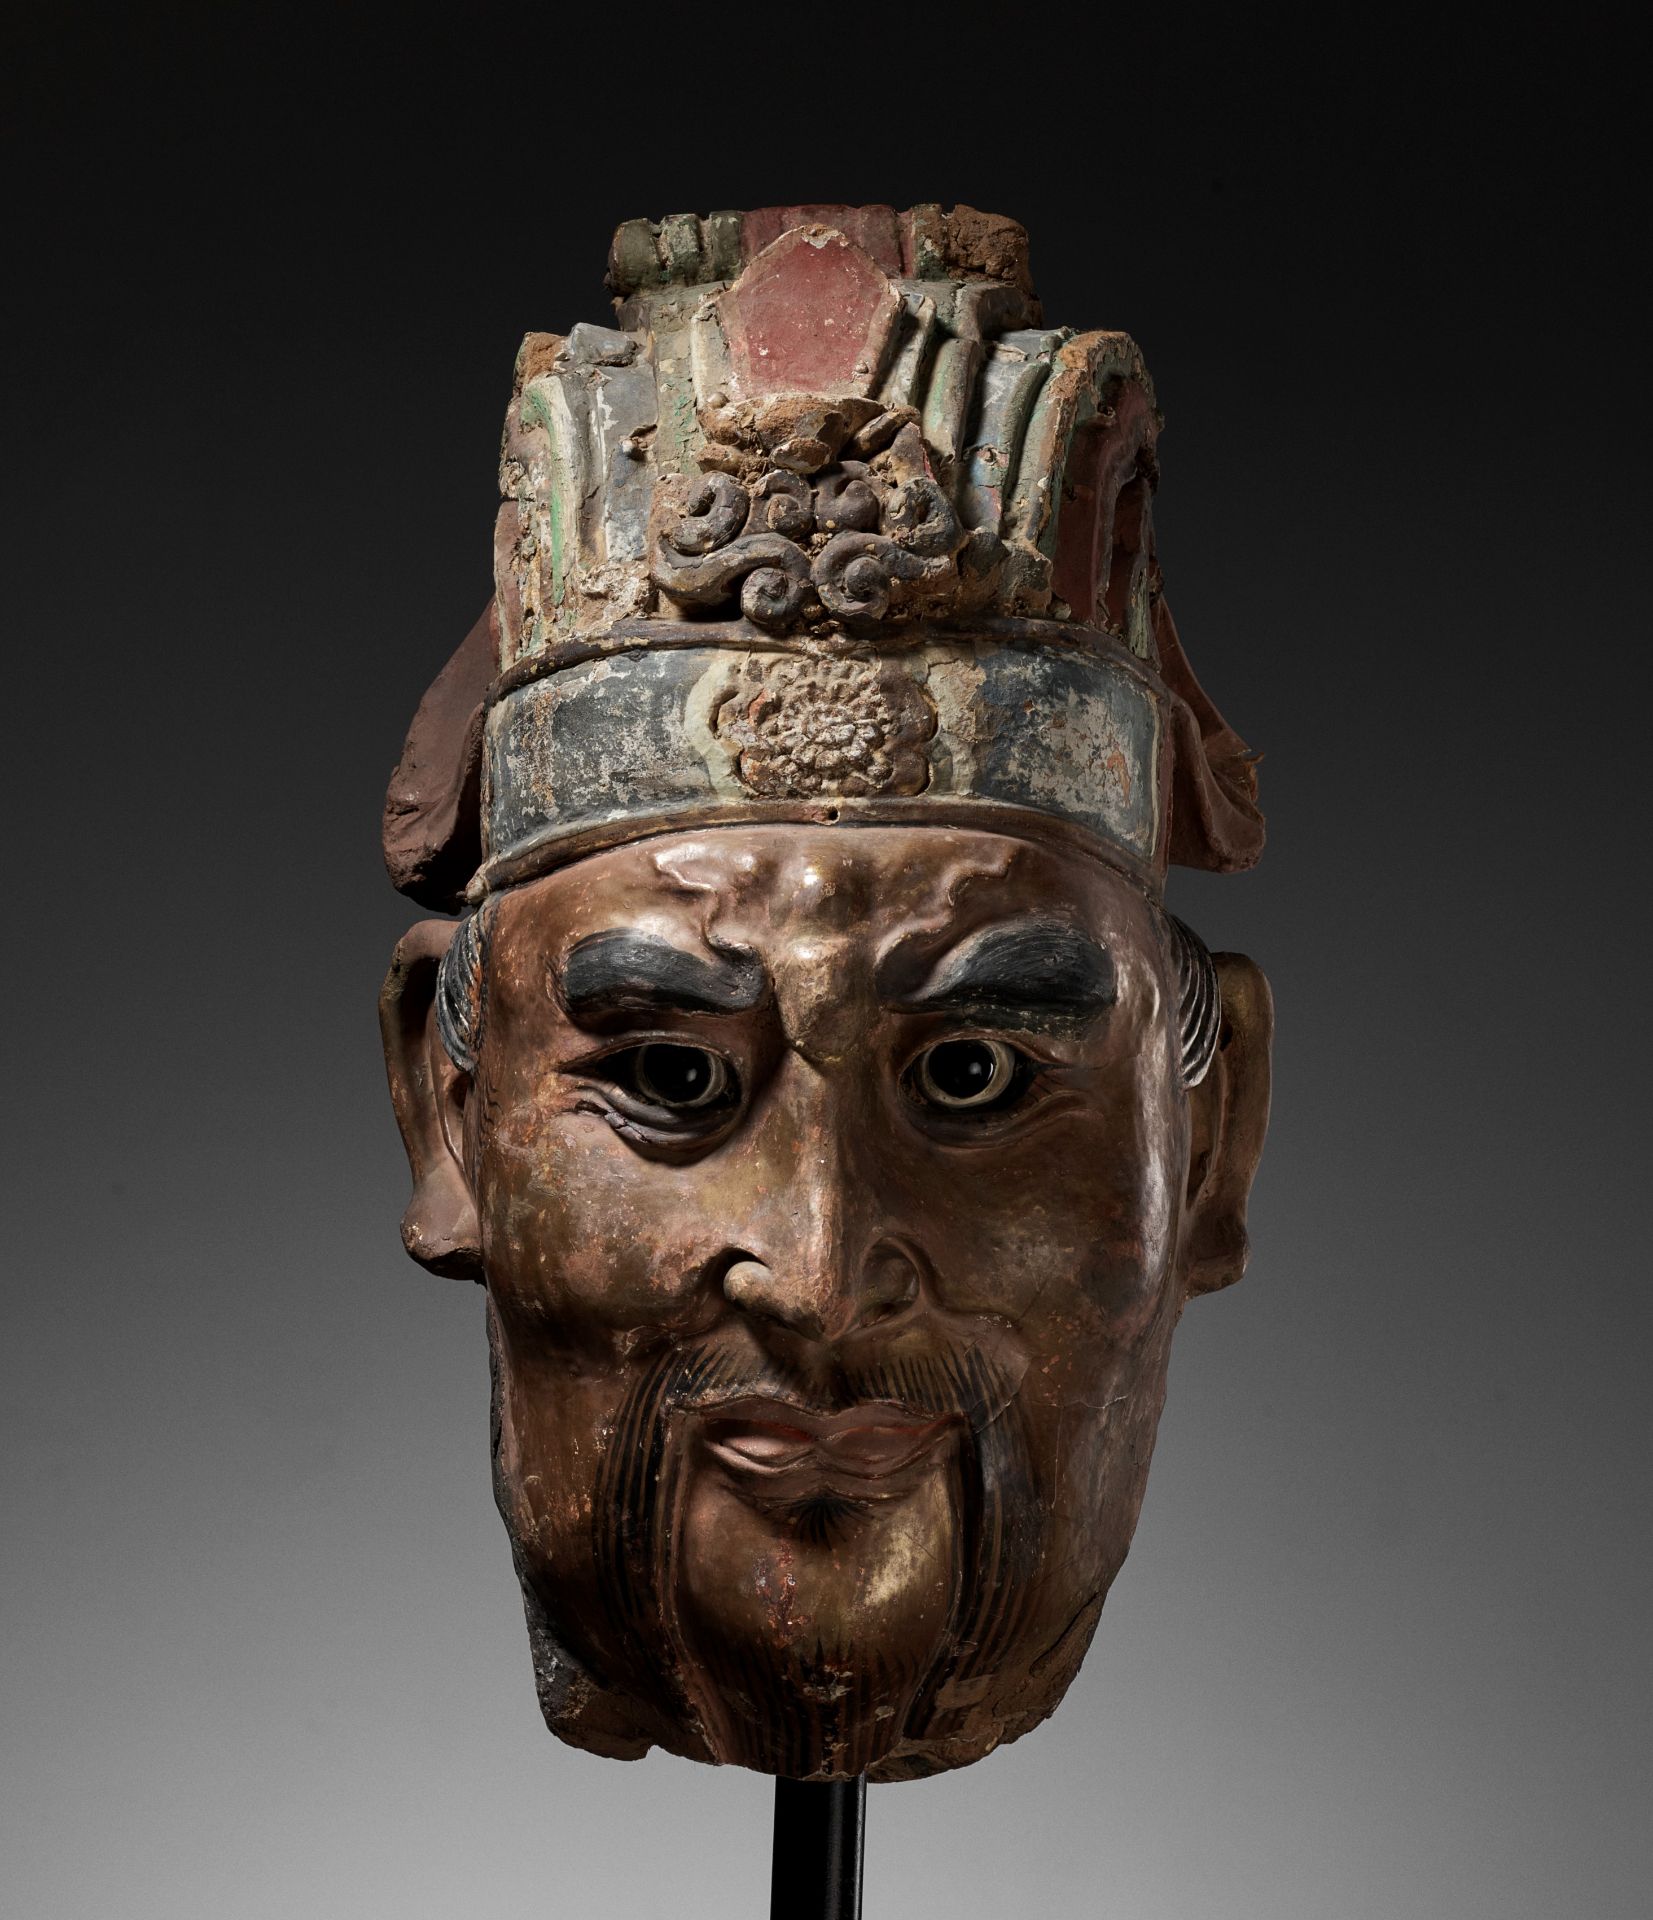 A LARGE PAINTED STUCCO HEAD OF A GUARDIAN KING, SONG TO MING DYNASTY